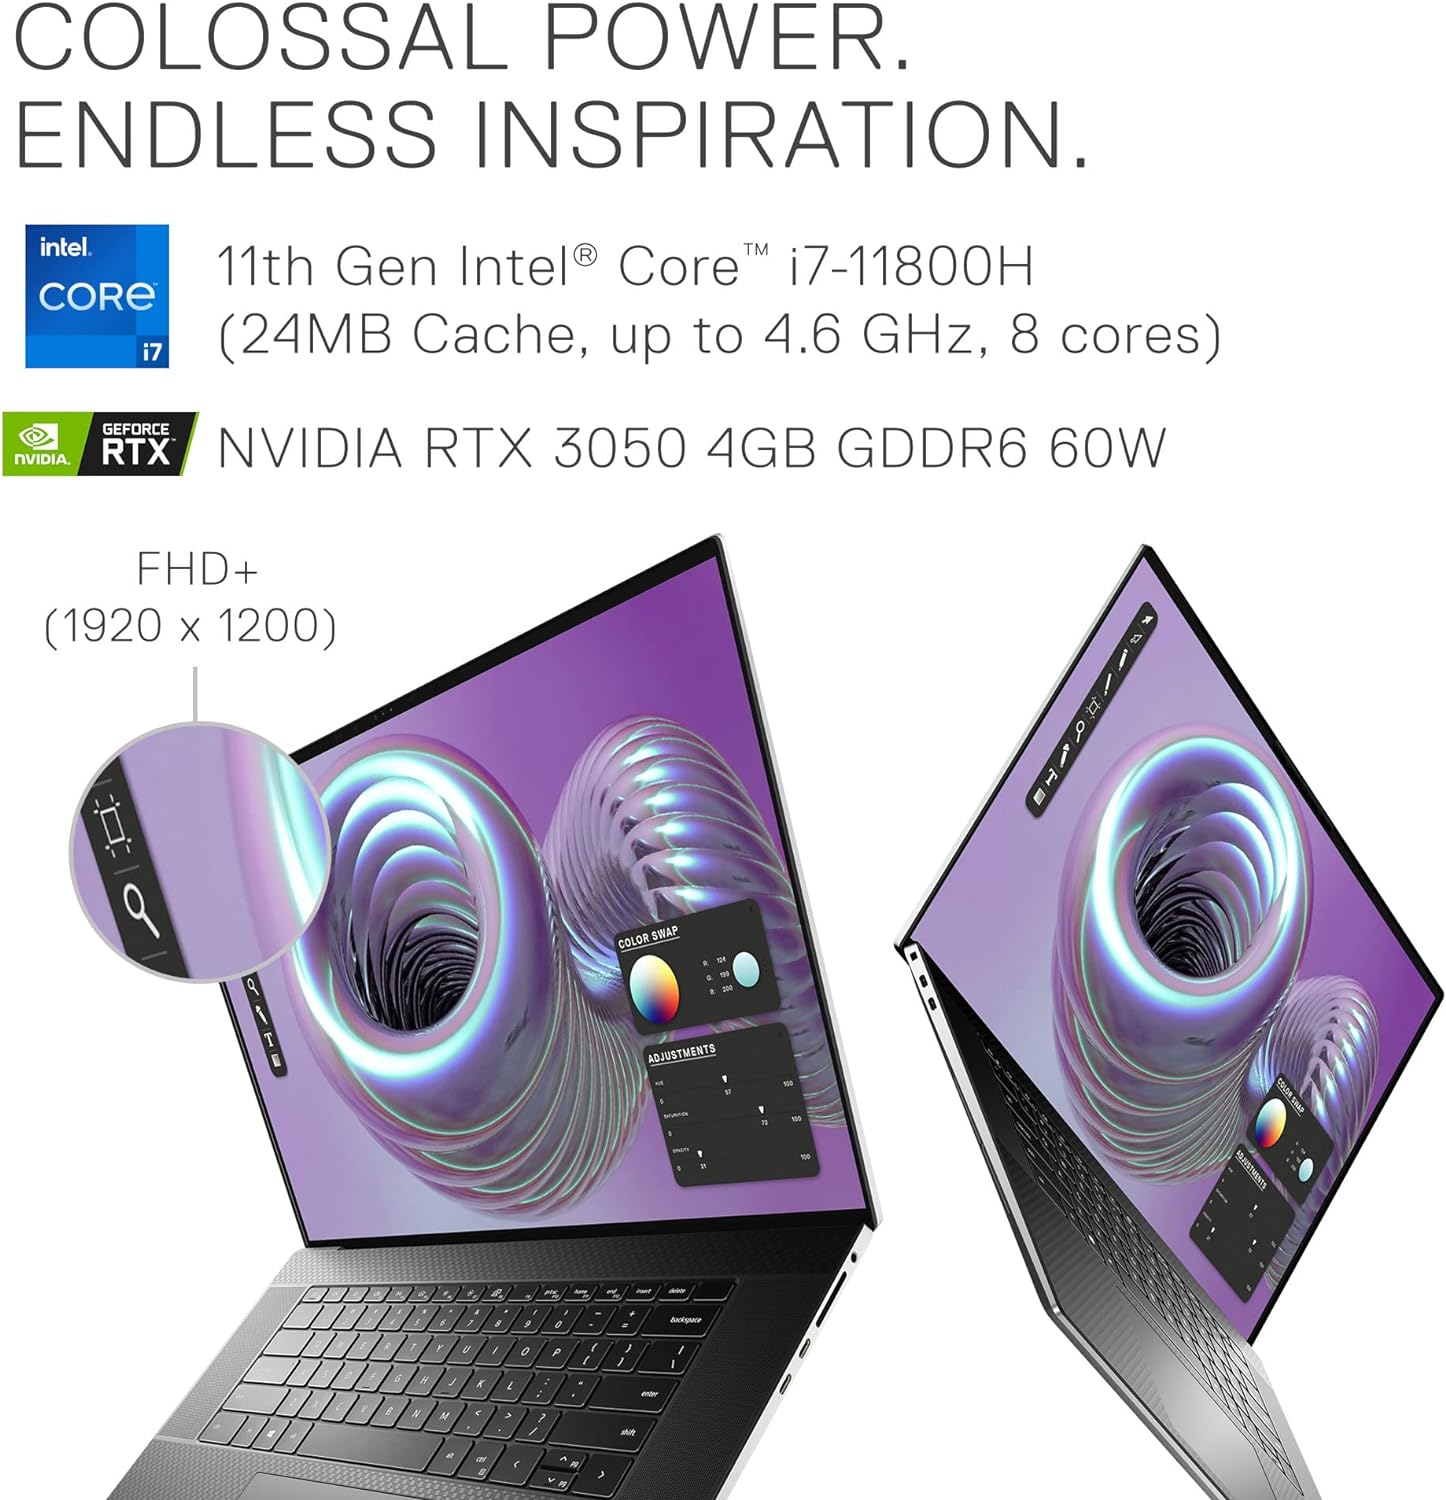 Dell XPS 17 9710, 17 inch FHD+ Laptop - $869